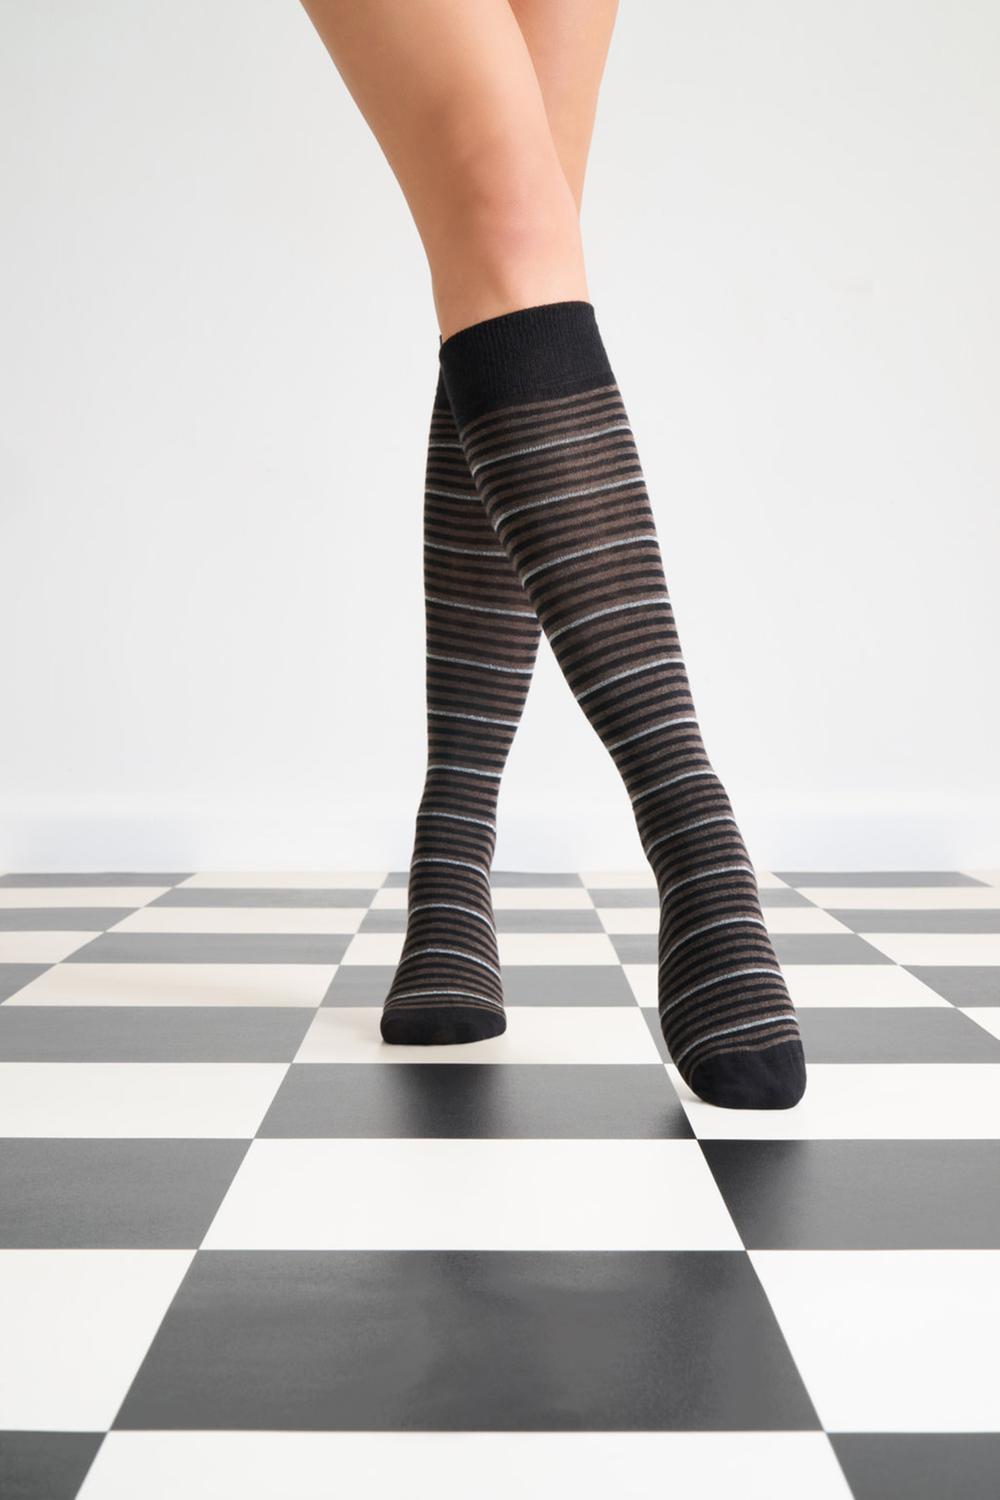 SiSi 1754 Multirighe Gambaletto - Cotton and cashmere blend knee-high horizontal striped socks in grey, black and sparkly silver.